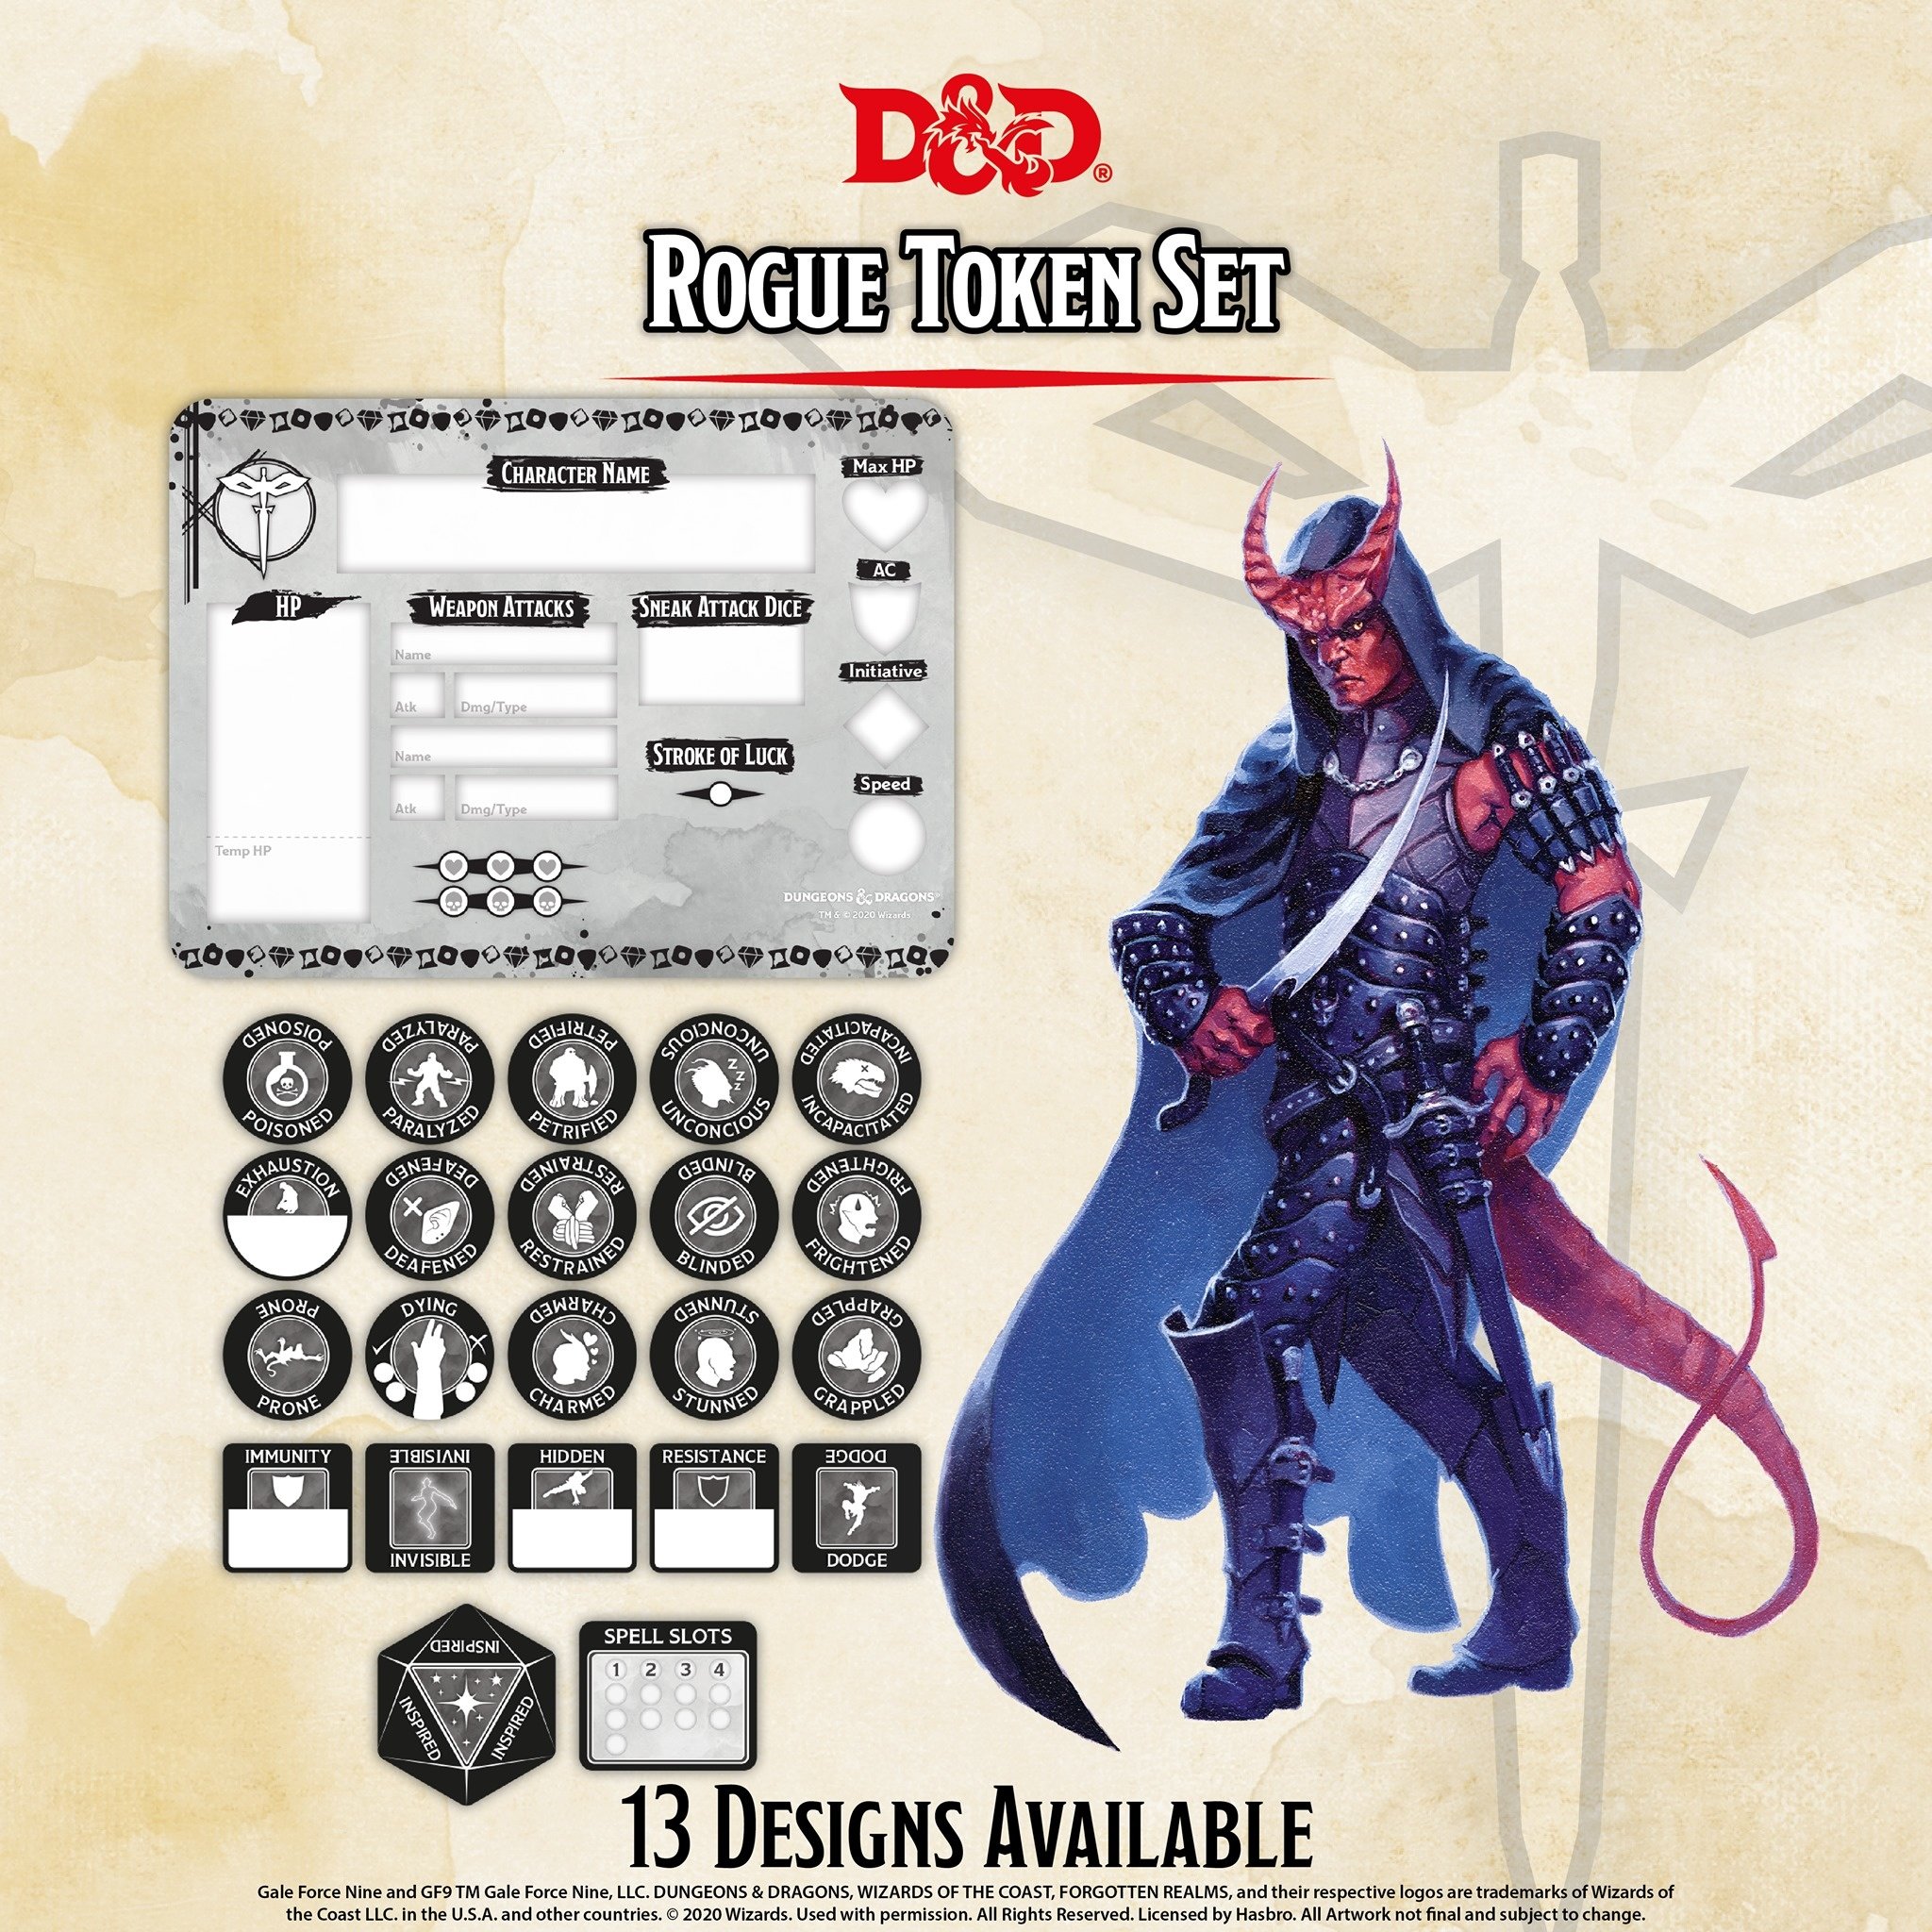 free dnd 5e character builder